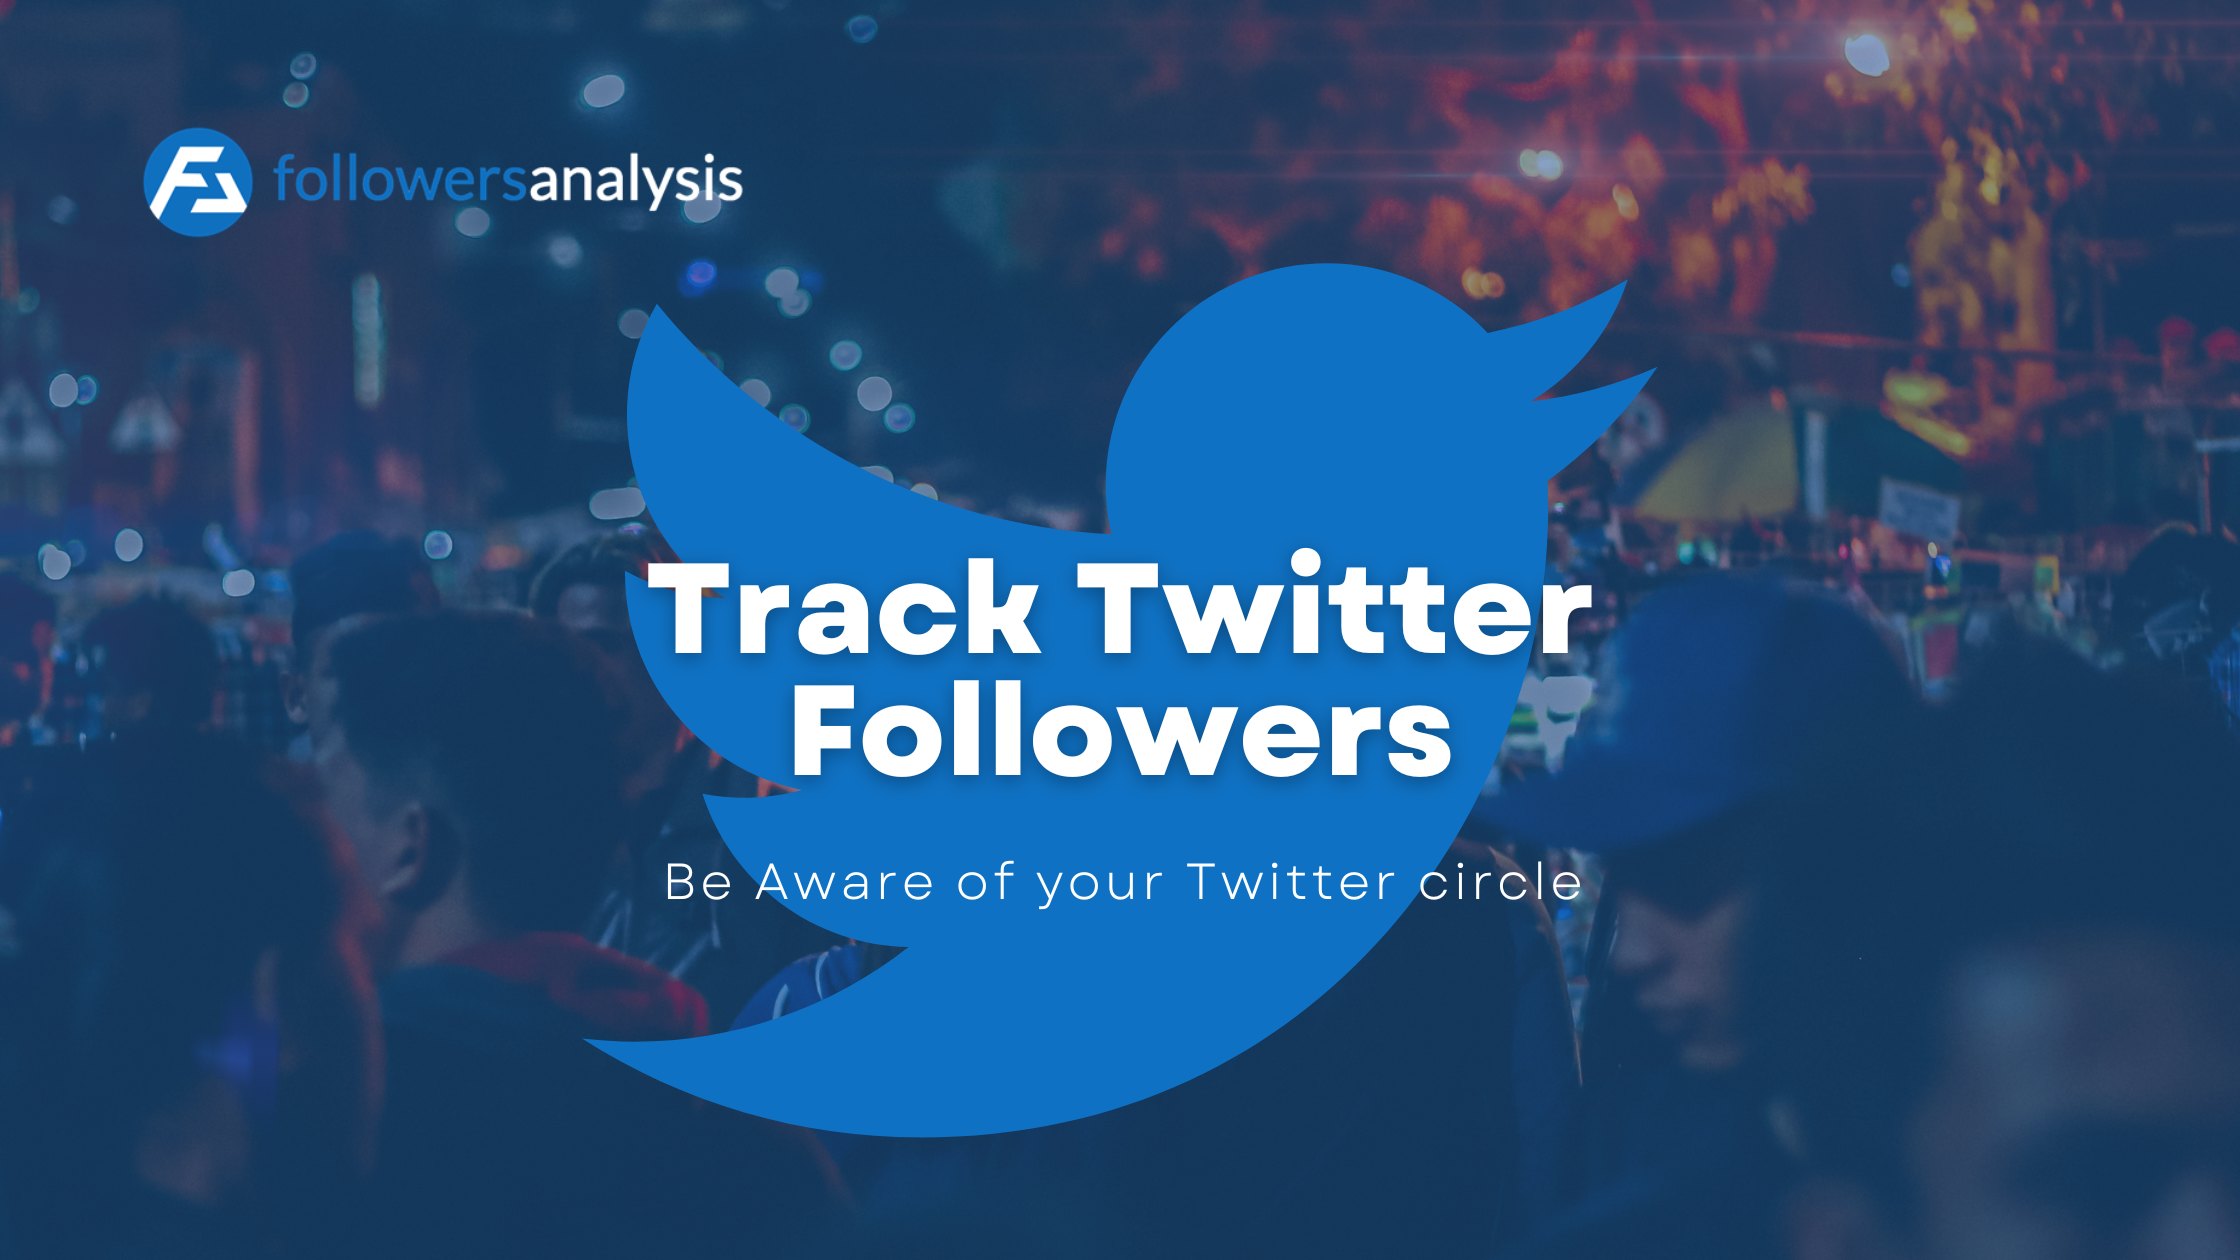 Track Twitter followers and be aware of your Twitter circle